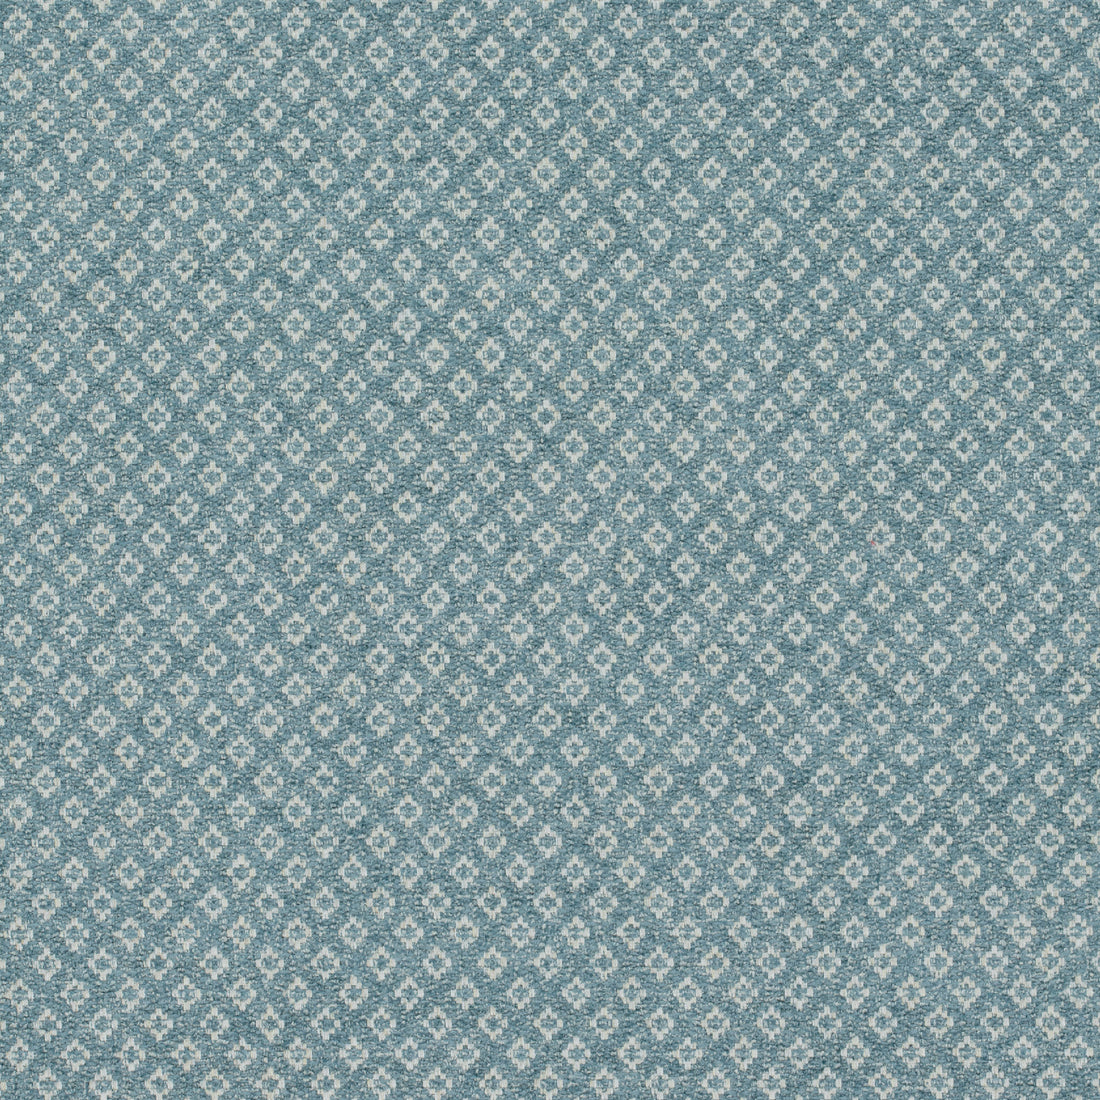 Claudio fabric in aqua color - pattern number AW72998 - by Anna French in the Manor collection